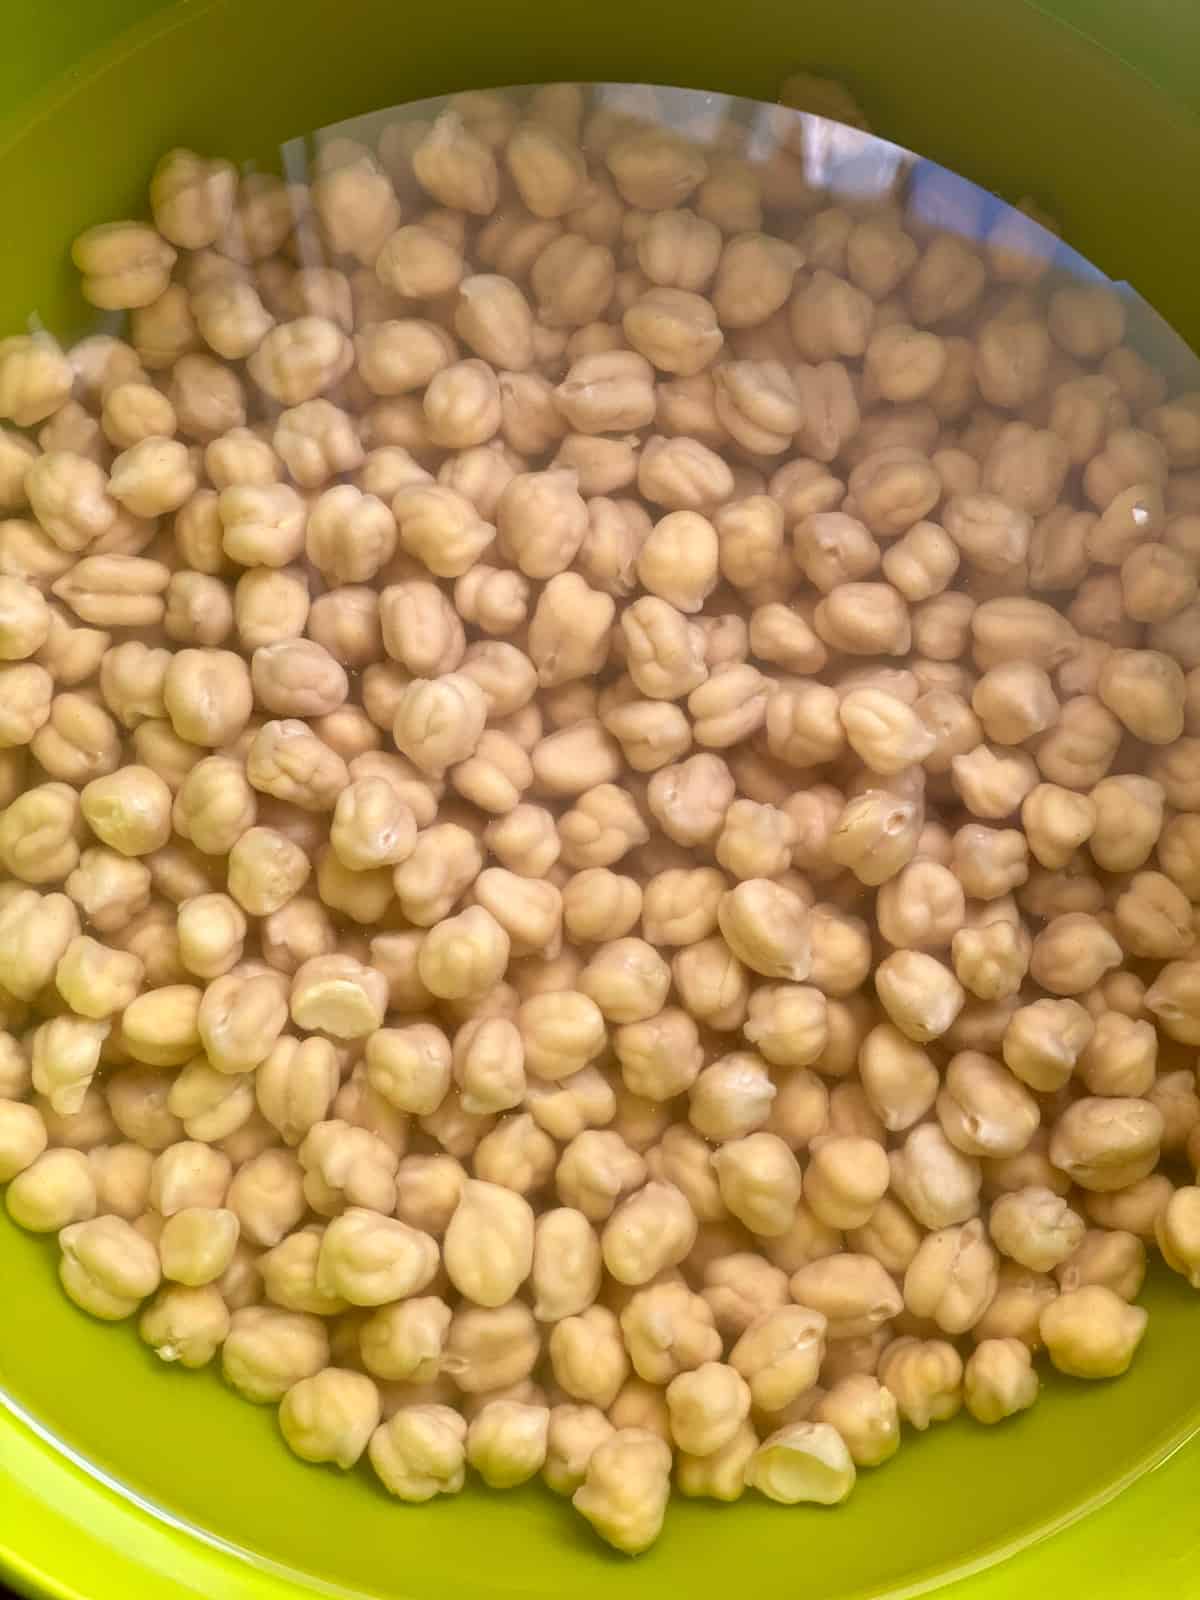 Chickpeas soaking in water.